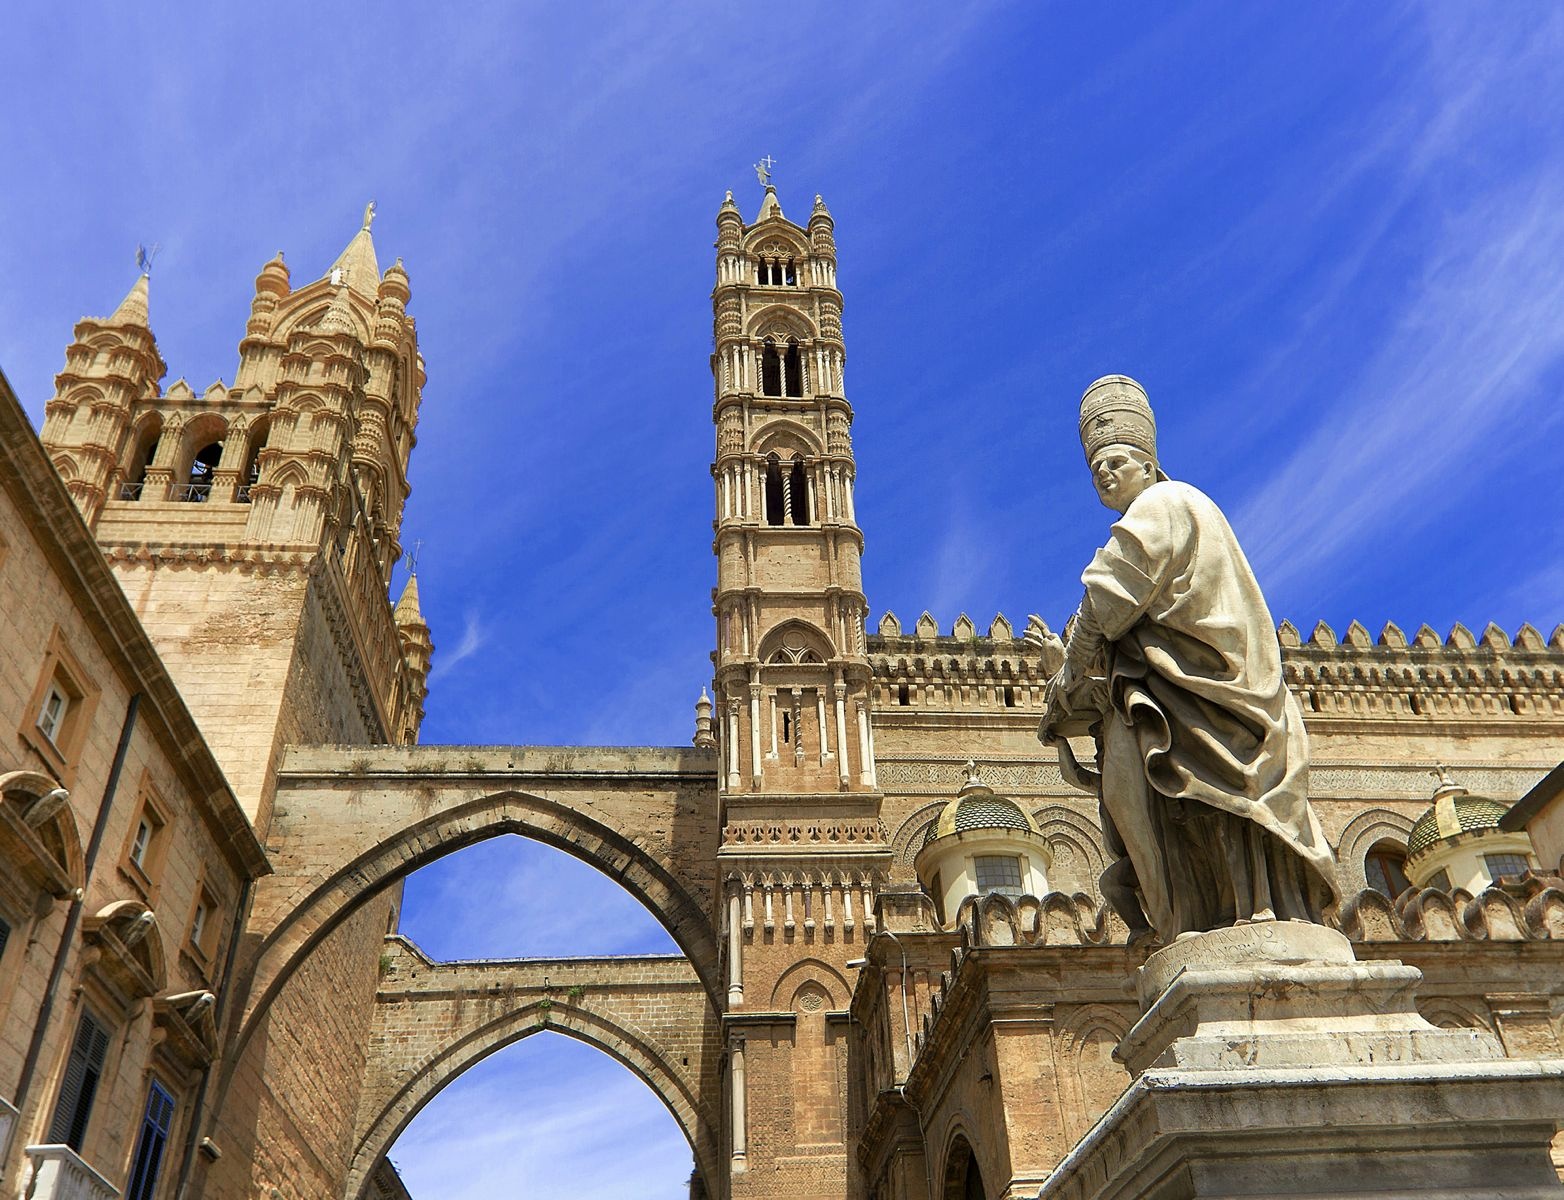 3-Hour Small Group Tour to Admire the Best Attractions in Palermo: Square of Shame | Piazza Pretoria  | Praetorian Palace | Town Hall |